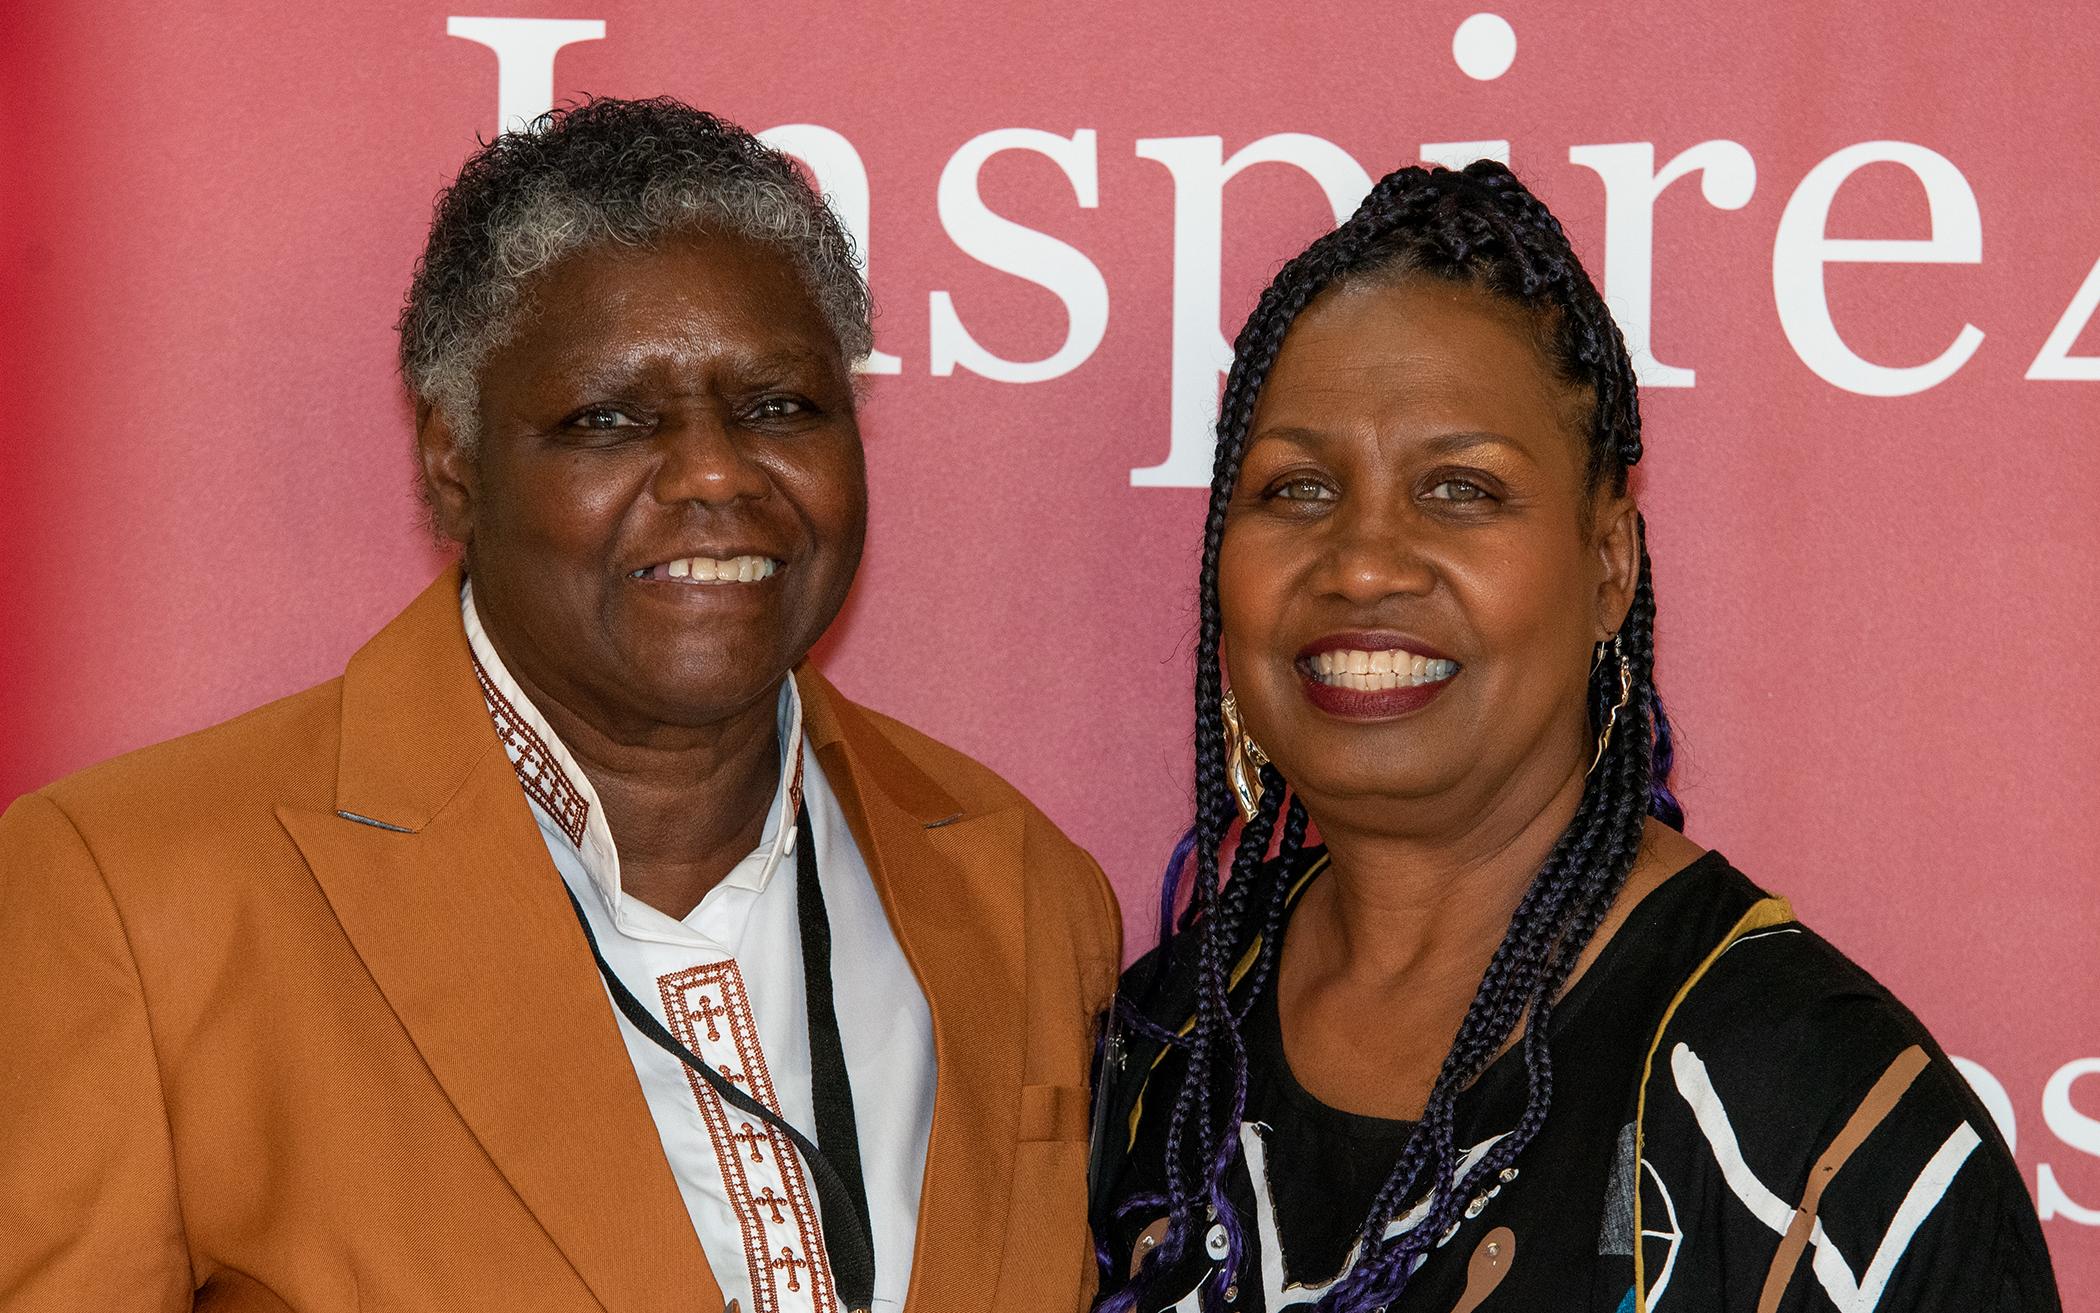 Rev. Sheila Holmes (left) and Michelle Loyd-Paige, Ph.D., received the Dante Venegas award in recognition of their work in racial reconciliation.